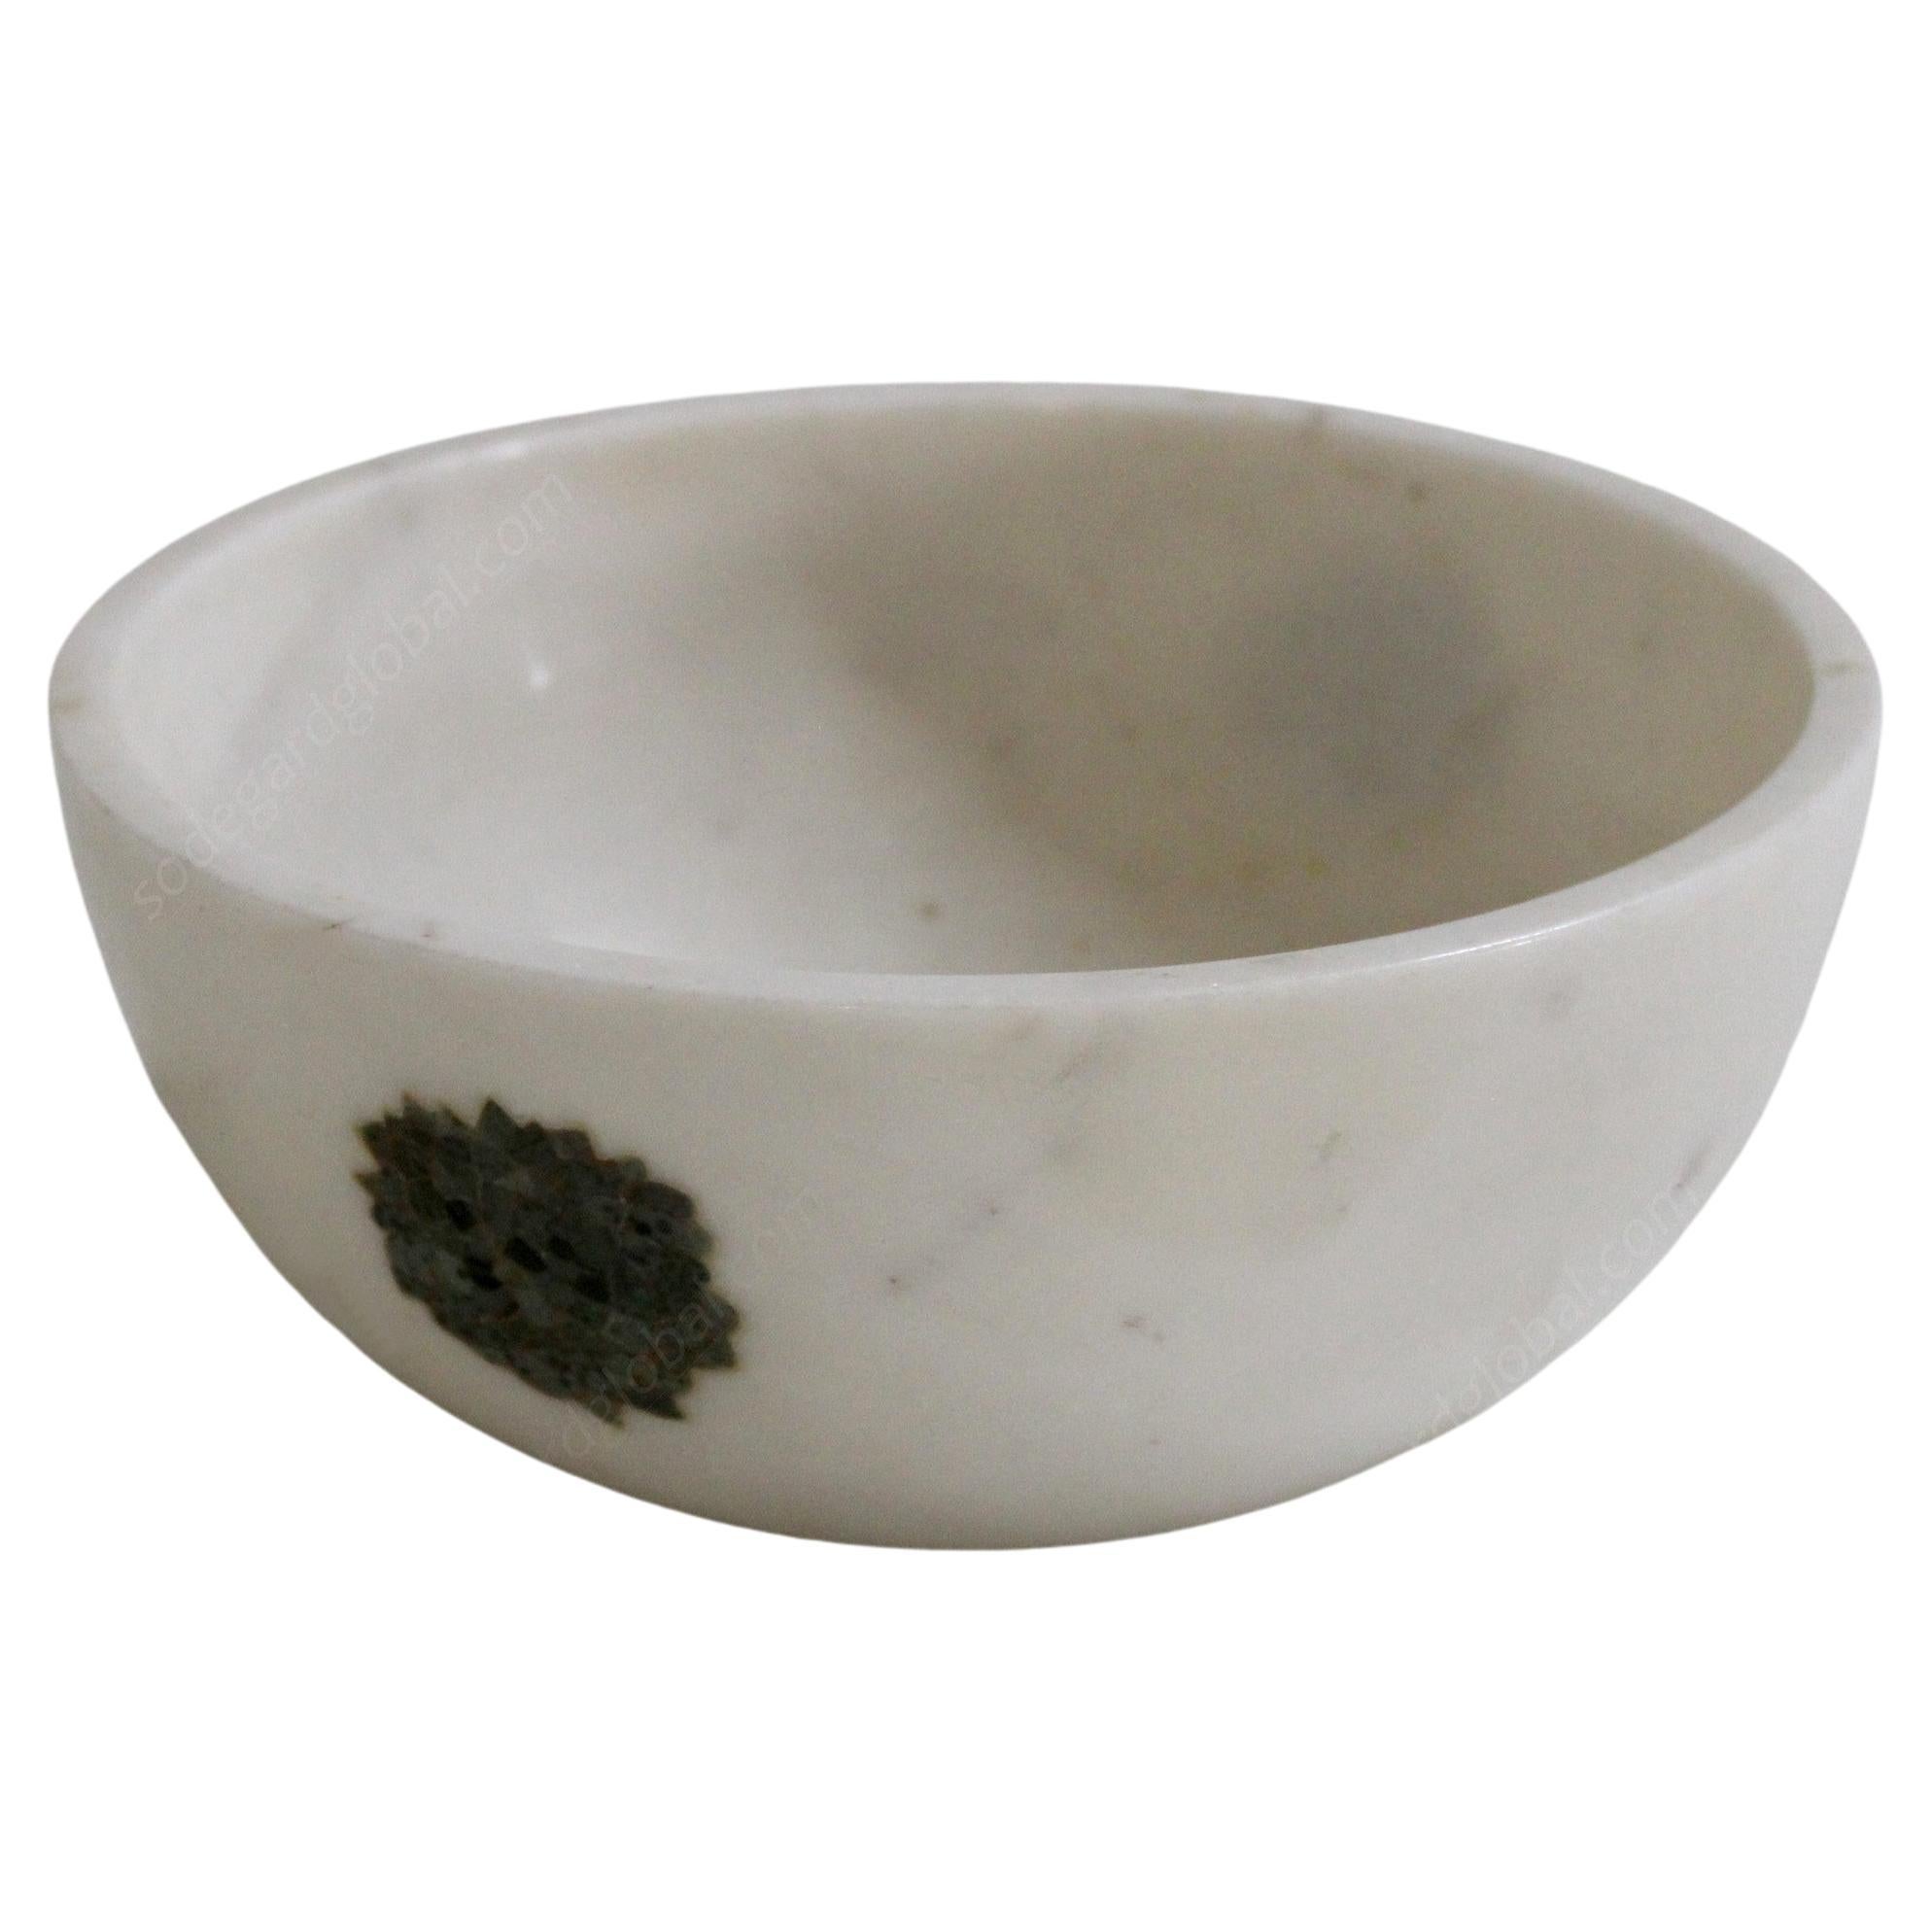 One of the best examples of reproduction of the Pietra Dura technique. This Flower bowl is inlaid with semi precious stone in White marble, perfect for a potpourri, a fruit bowl or just a key catch.

Flower bowl
Size=10